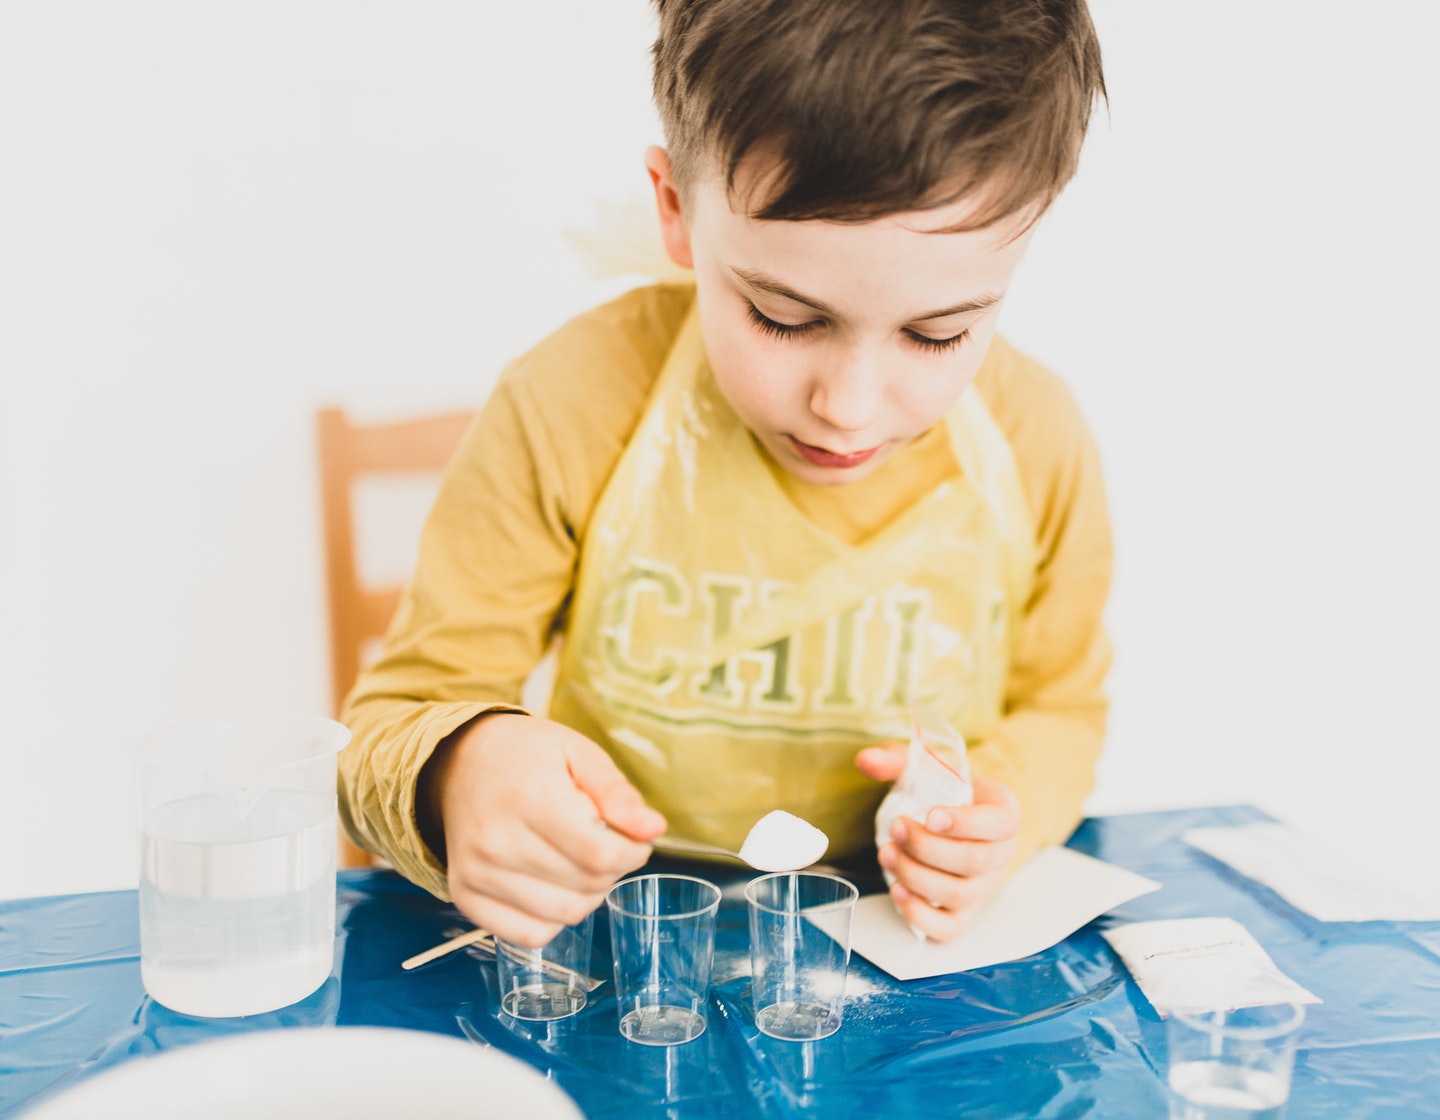 Child playing with science kit